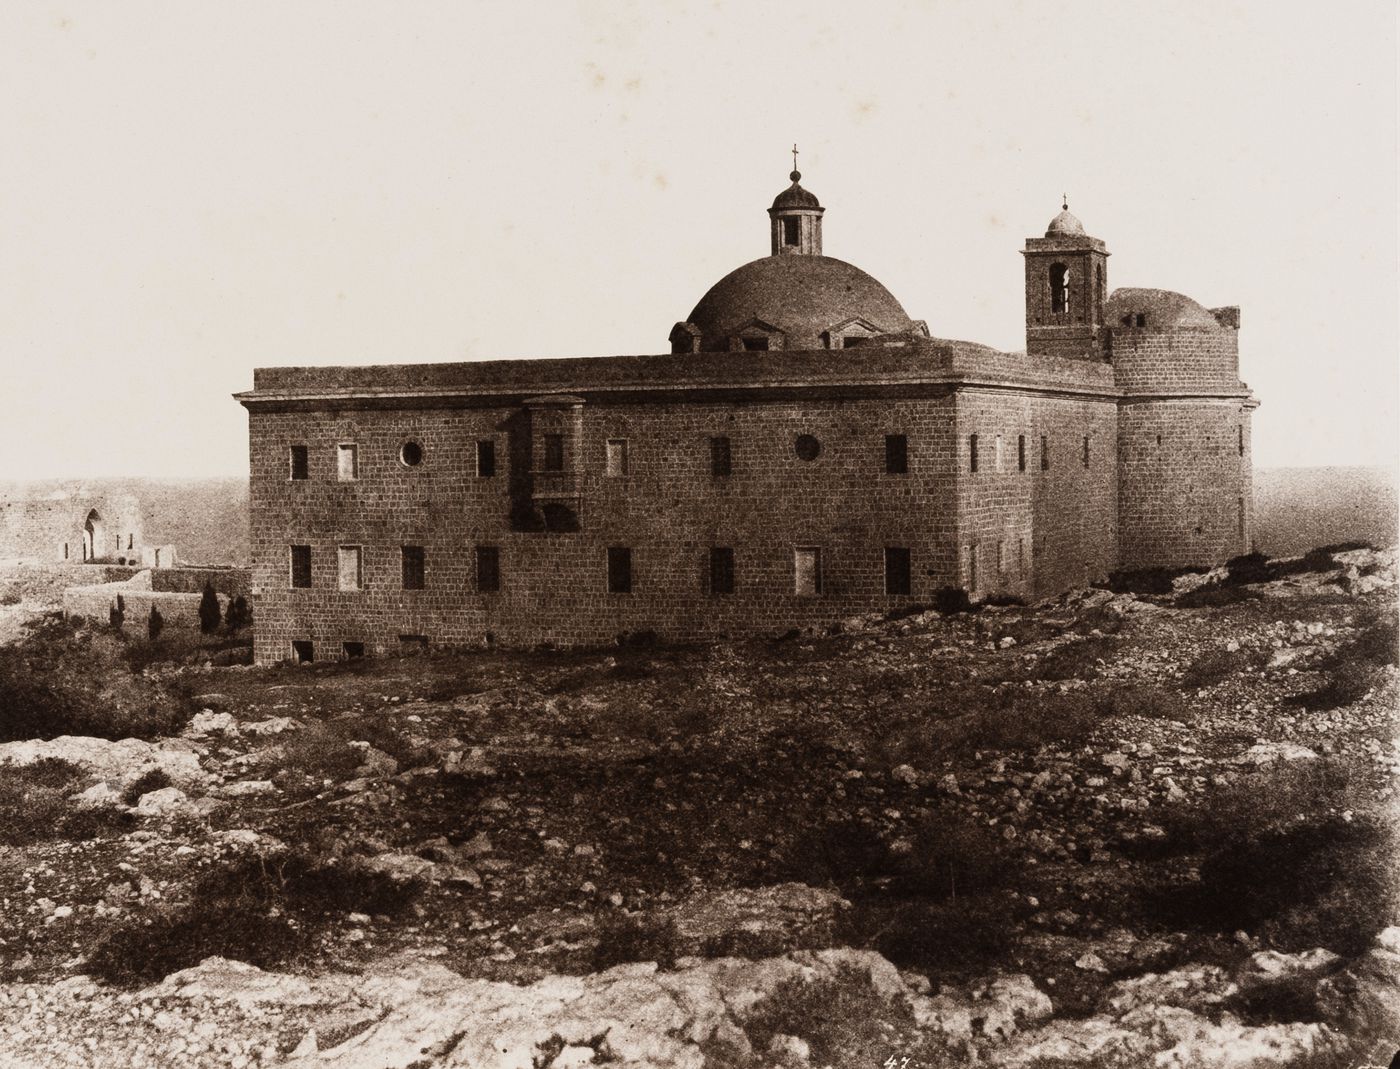 View of a convent on Mount Carmel, Ottoman Empire (now in Israel)